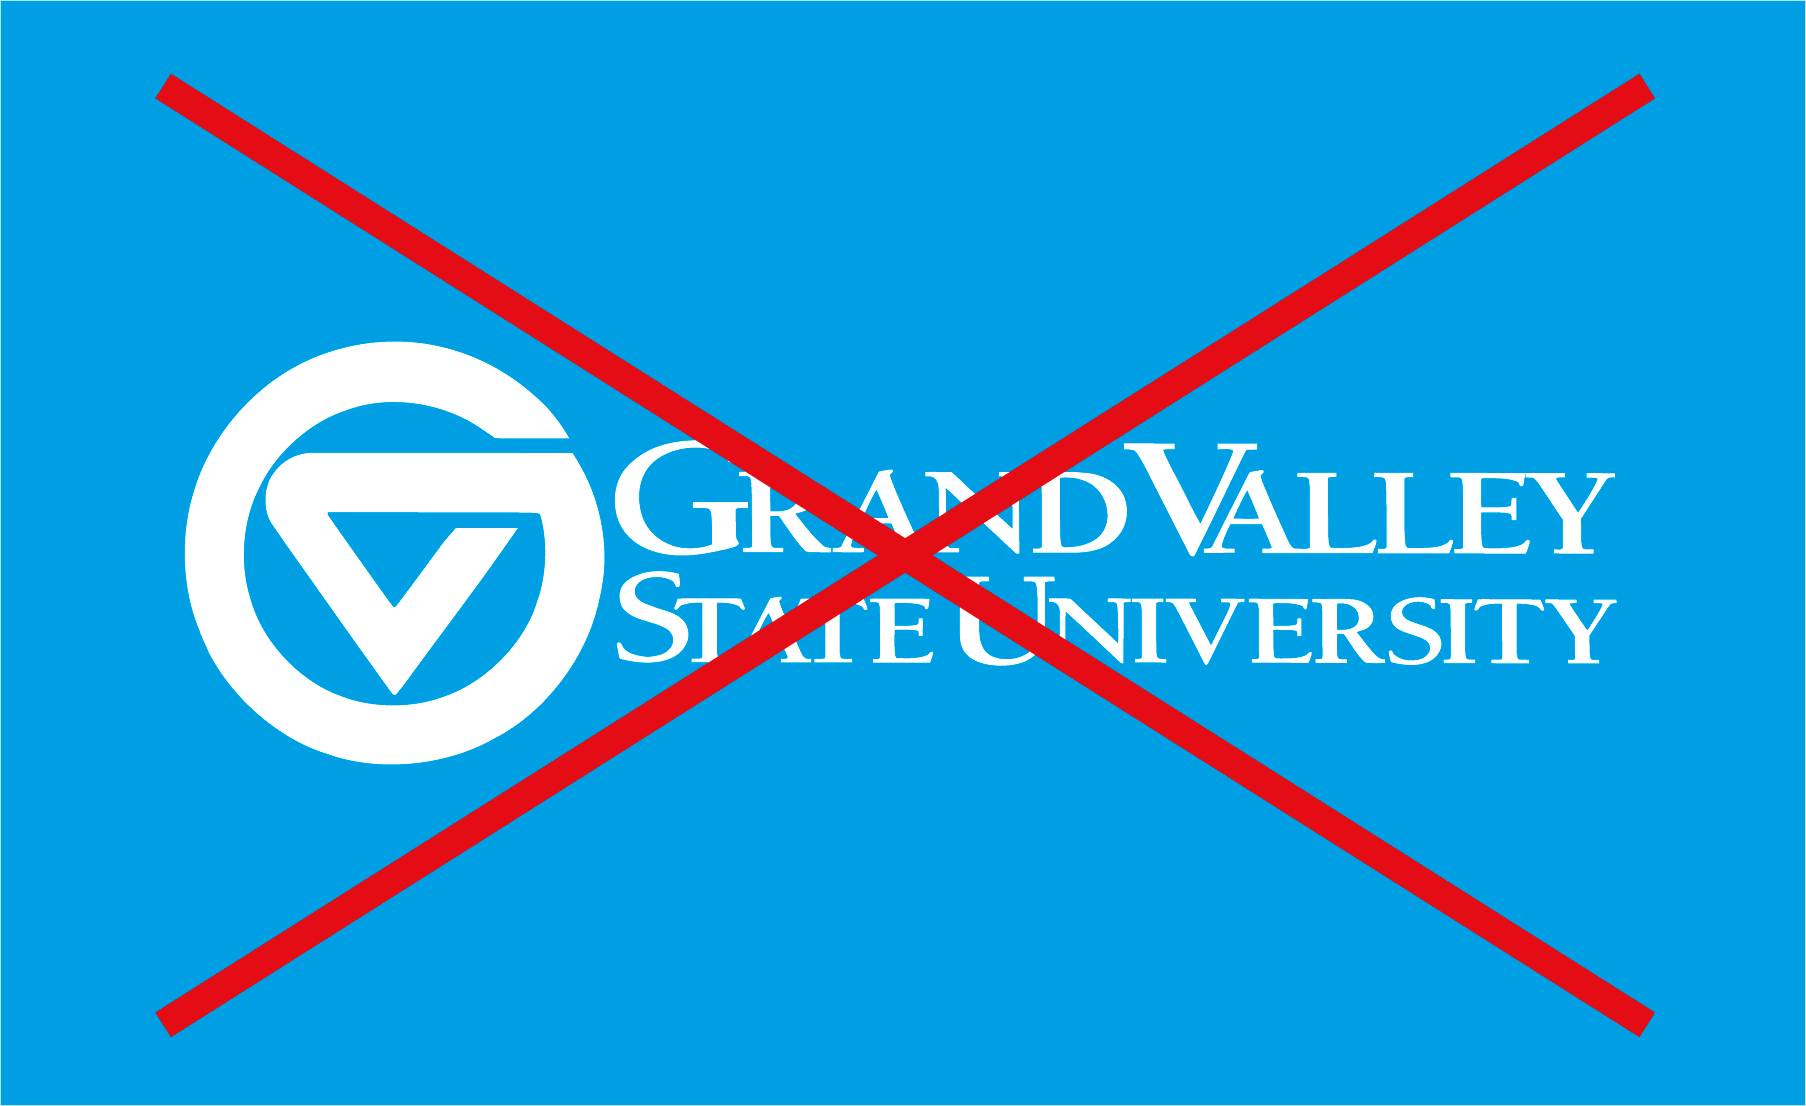 A Grand Valley logo missing its registered trademark symbol. This is overlaid with a red X.